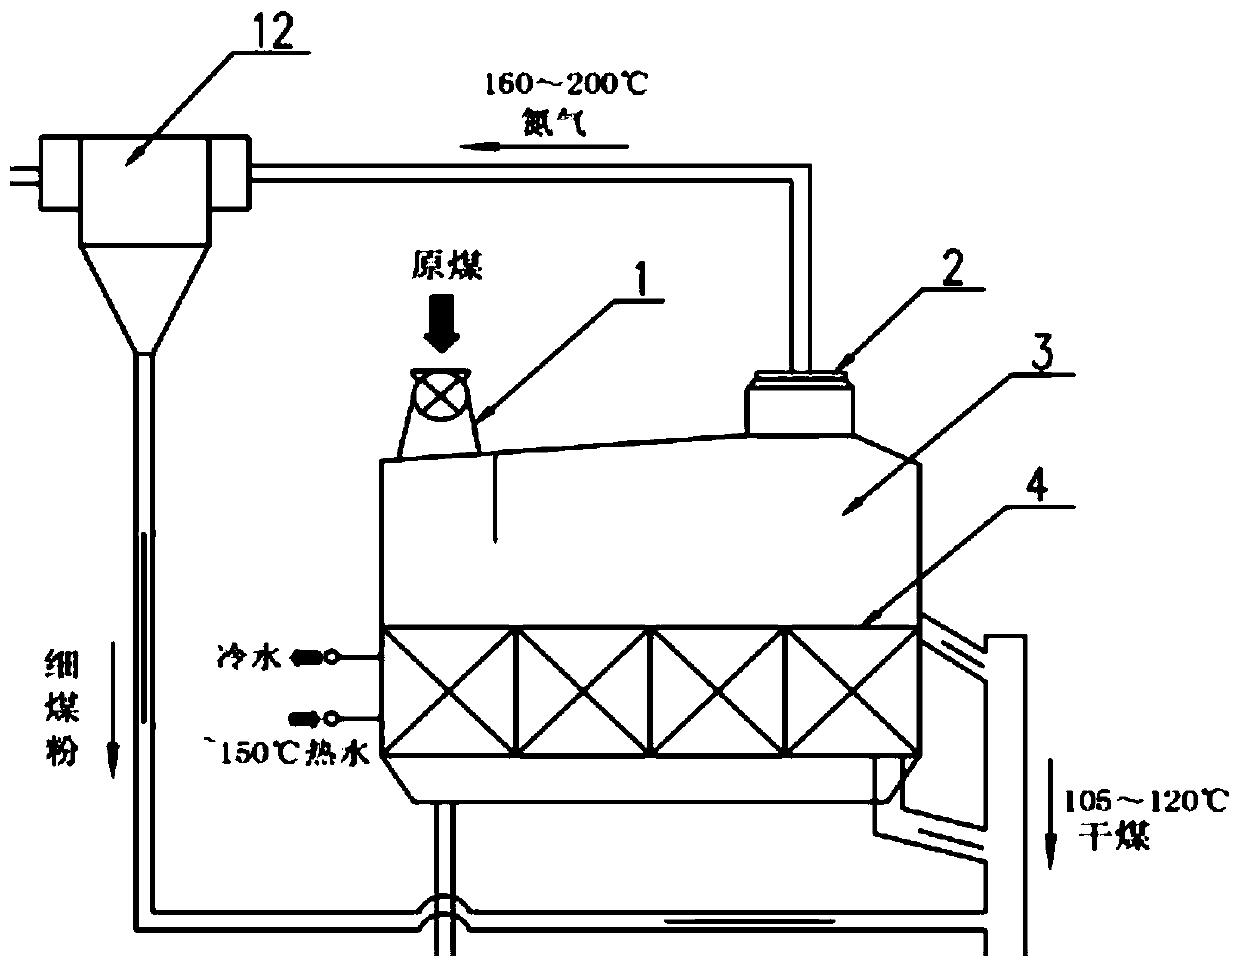 Dual-heat-source low-rank-coal low-temperature-carbonization pyrolysis technology system